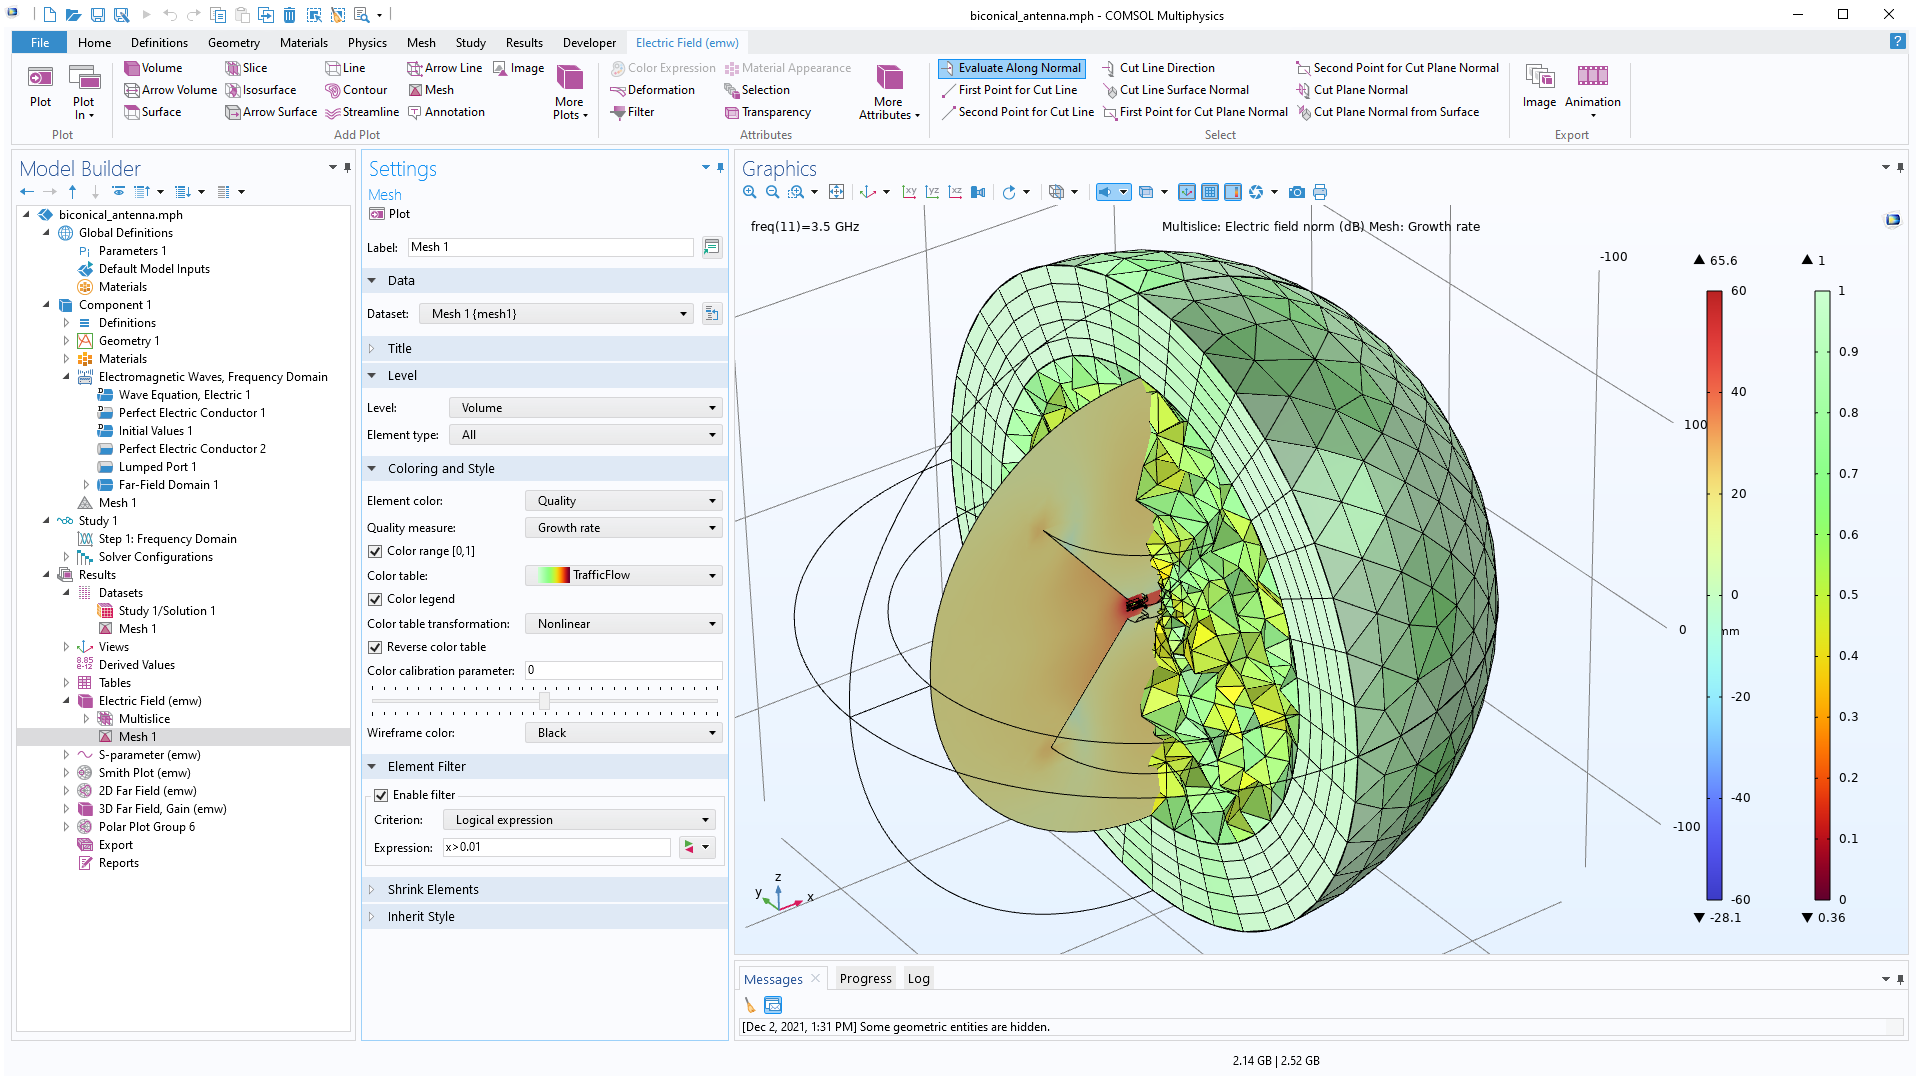 The COMSOL Multiphysics UI showing the Model Builder with the Mesh node selected, the corresponding Settings window, and a Biconical Antenna  model in the Graphics window.